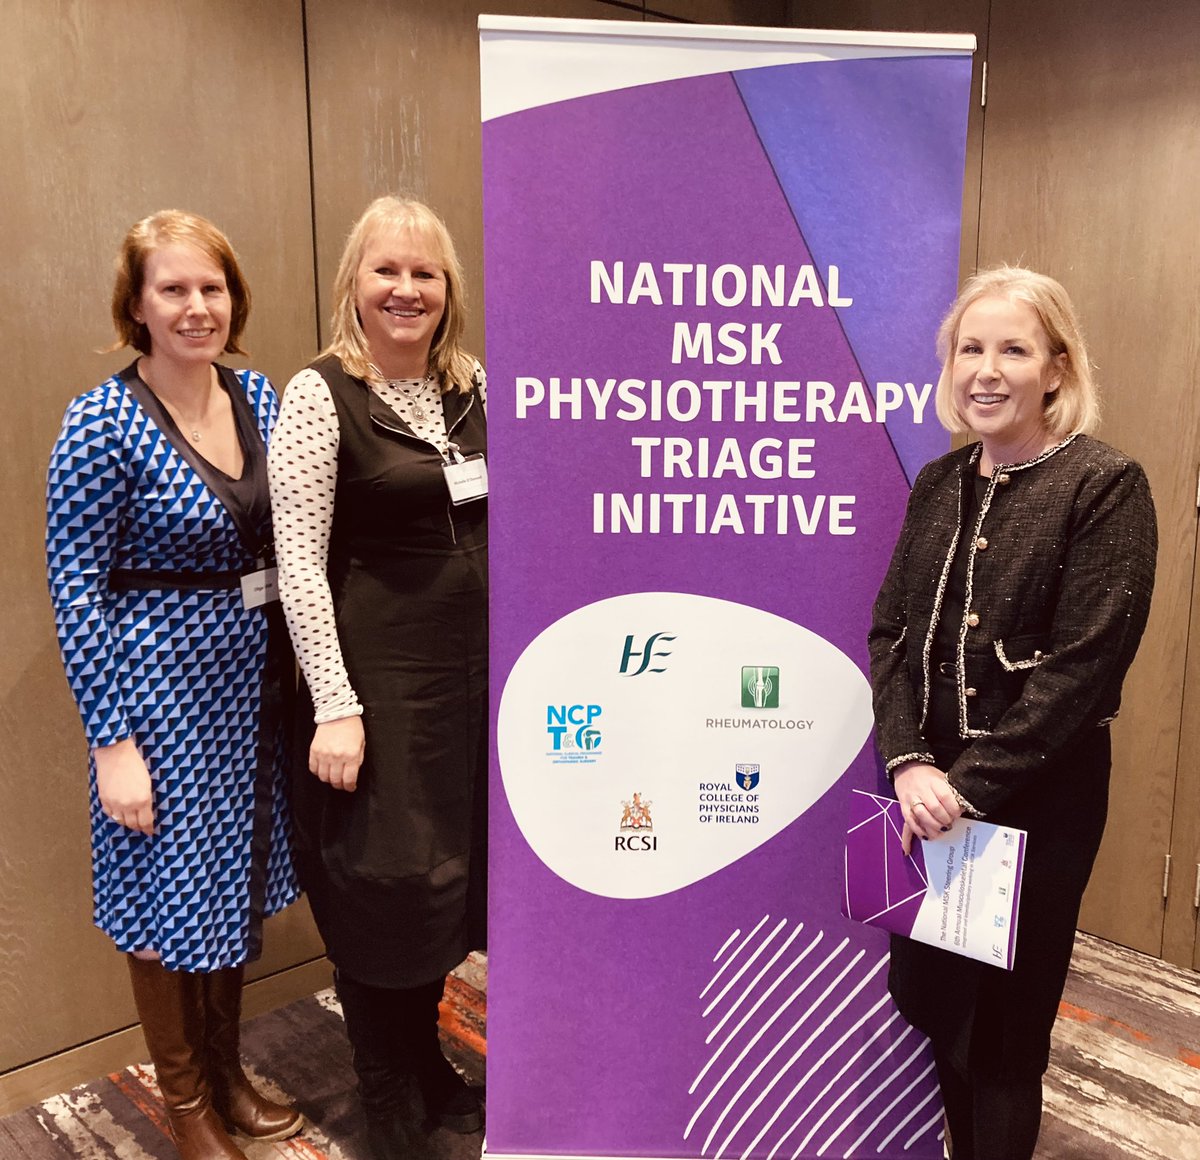 Glad of the invitation to present #WorkAbleSolutions at National MSK Physiotherapy Triage Conference The passion to improve pathways & client outcomes evident in the room Opportunities to collaborate across disciplines agreed @SteedFiona @marieomir @modonnellHT @olga48394704